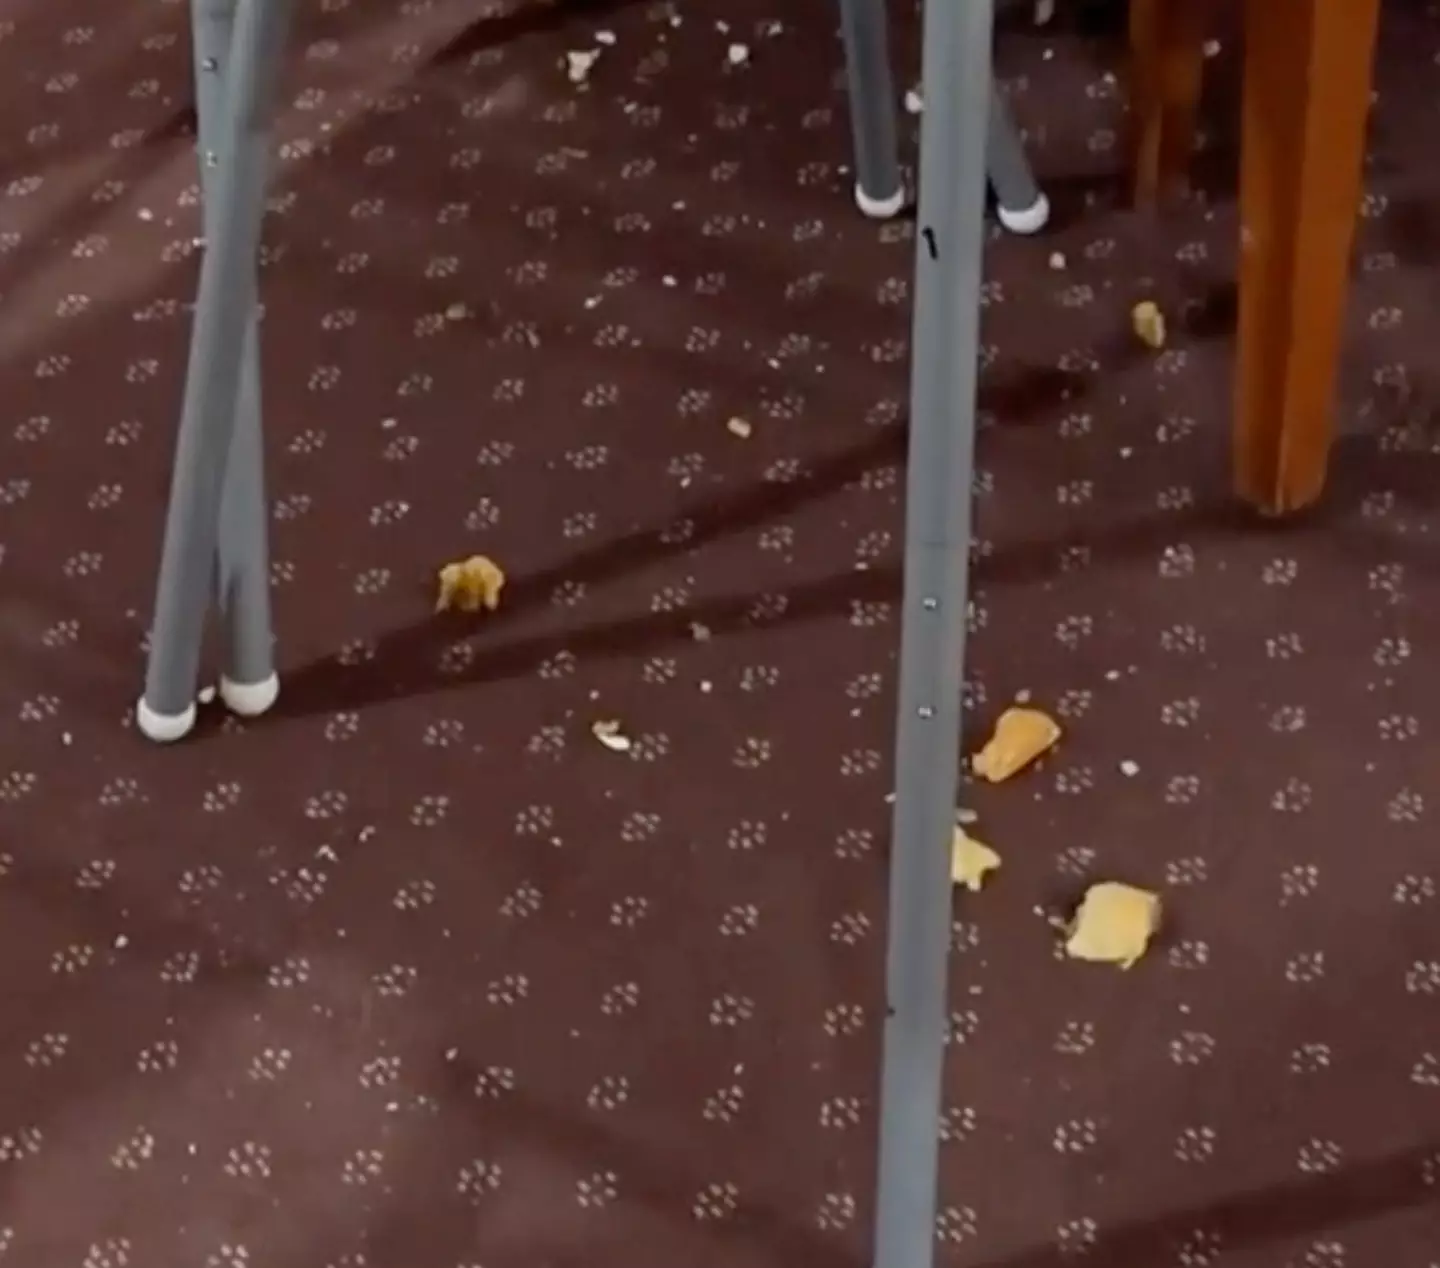 Chunks of food had been left scattered on the floor.